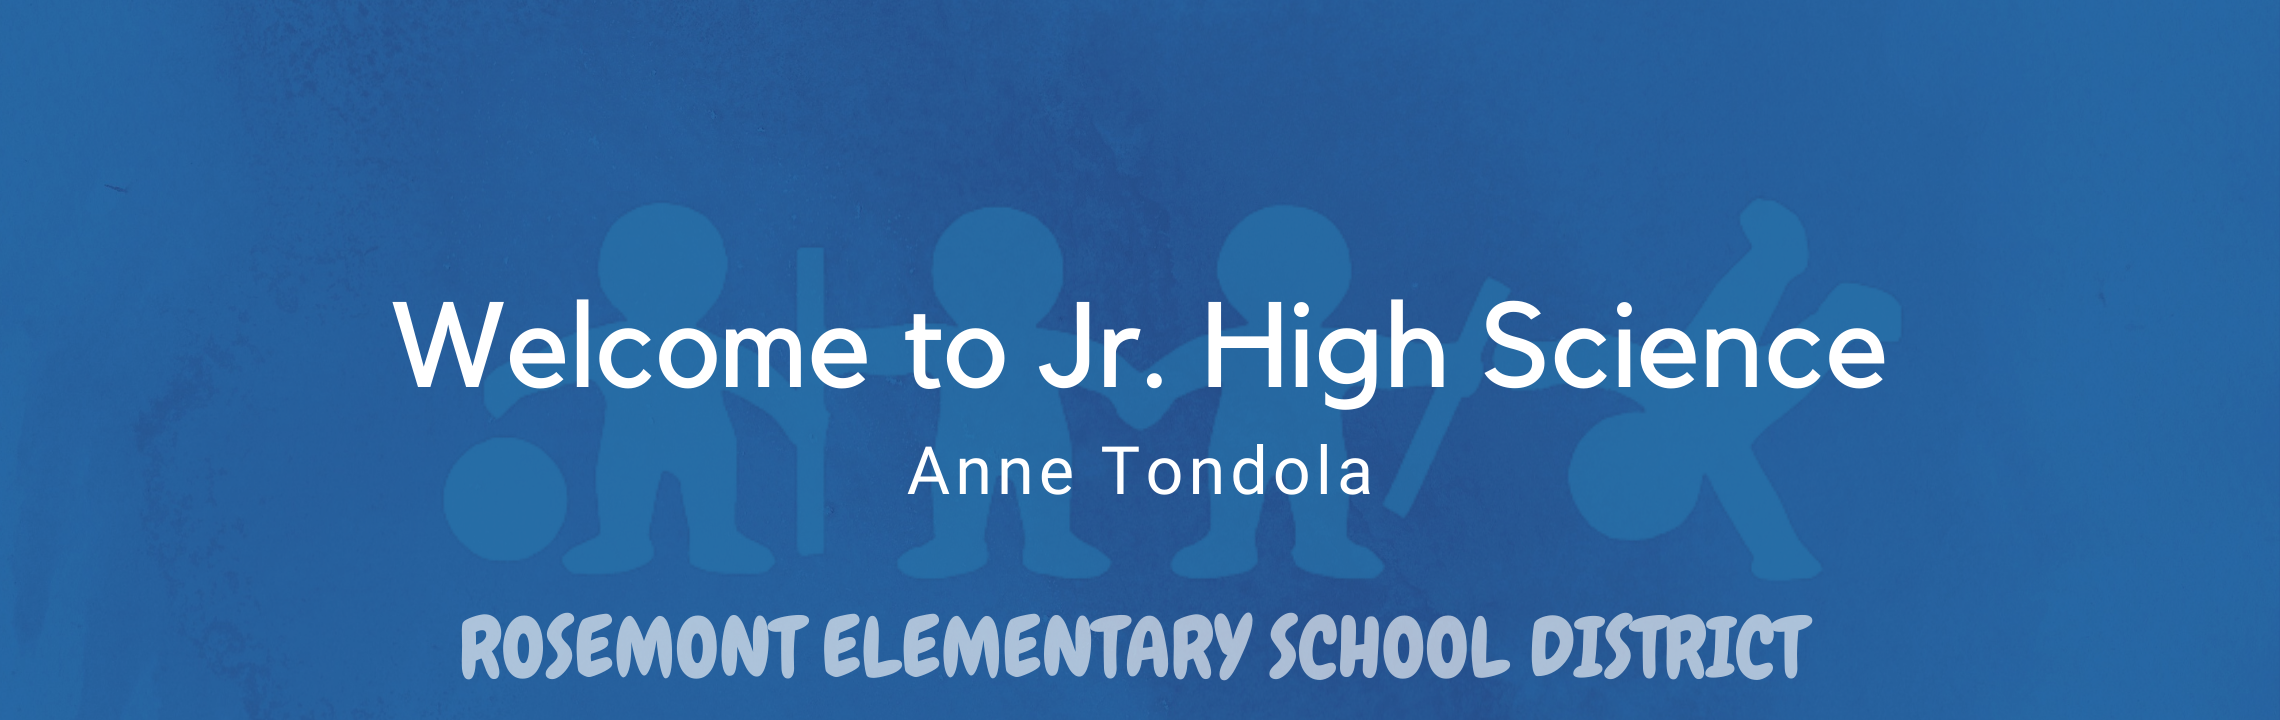 Welcome to Jr. High Science! Mrs. Anne Tondola,  Rosemont Elementary Schools 